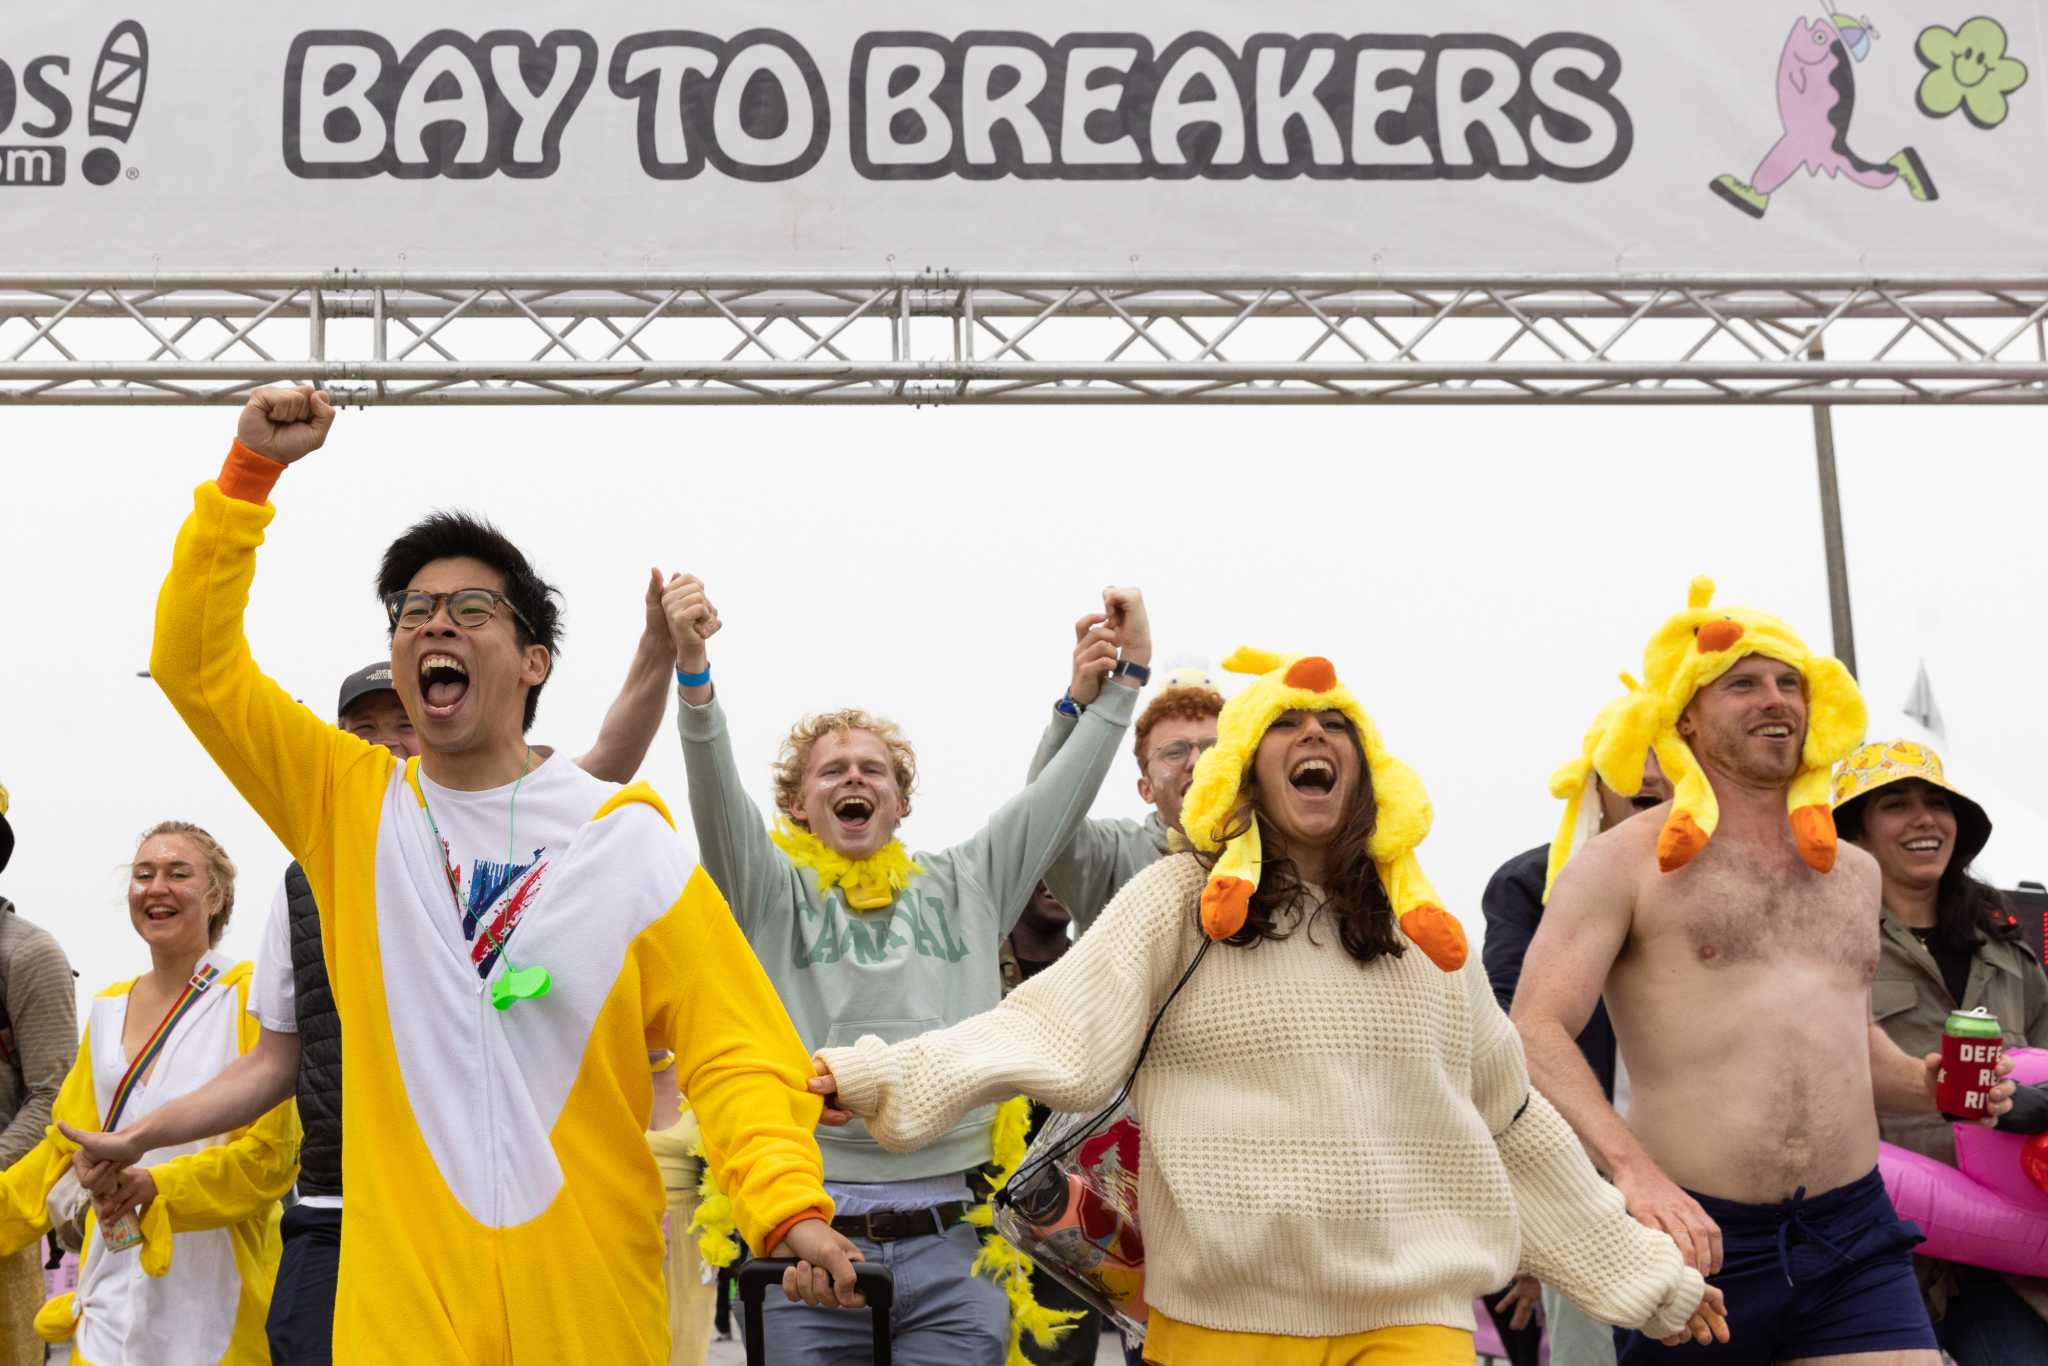 Bay to Breakers Winners emerge from among crowd of runners, revelers